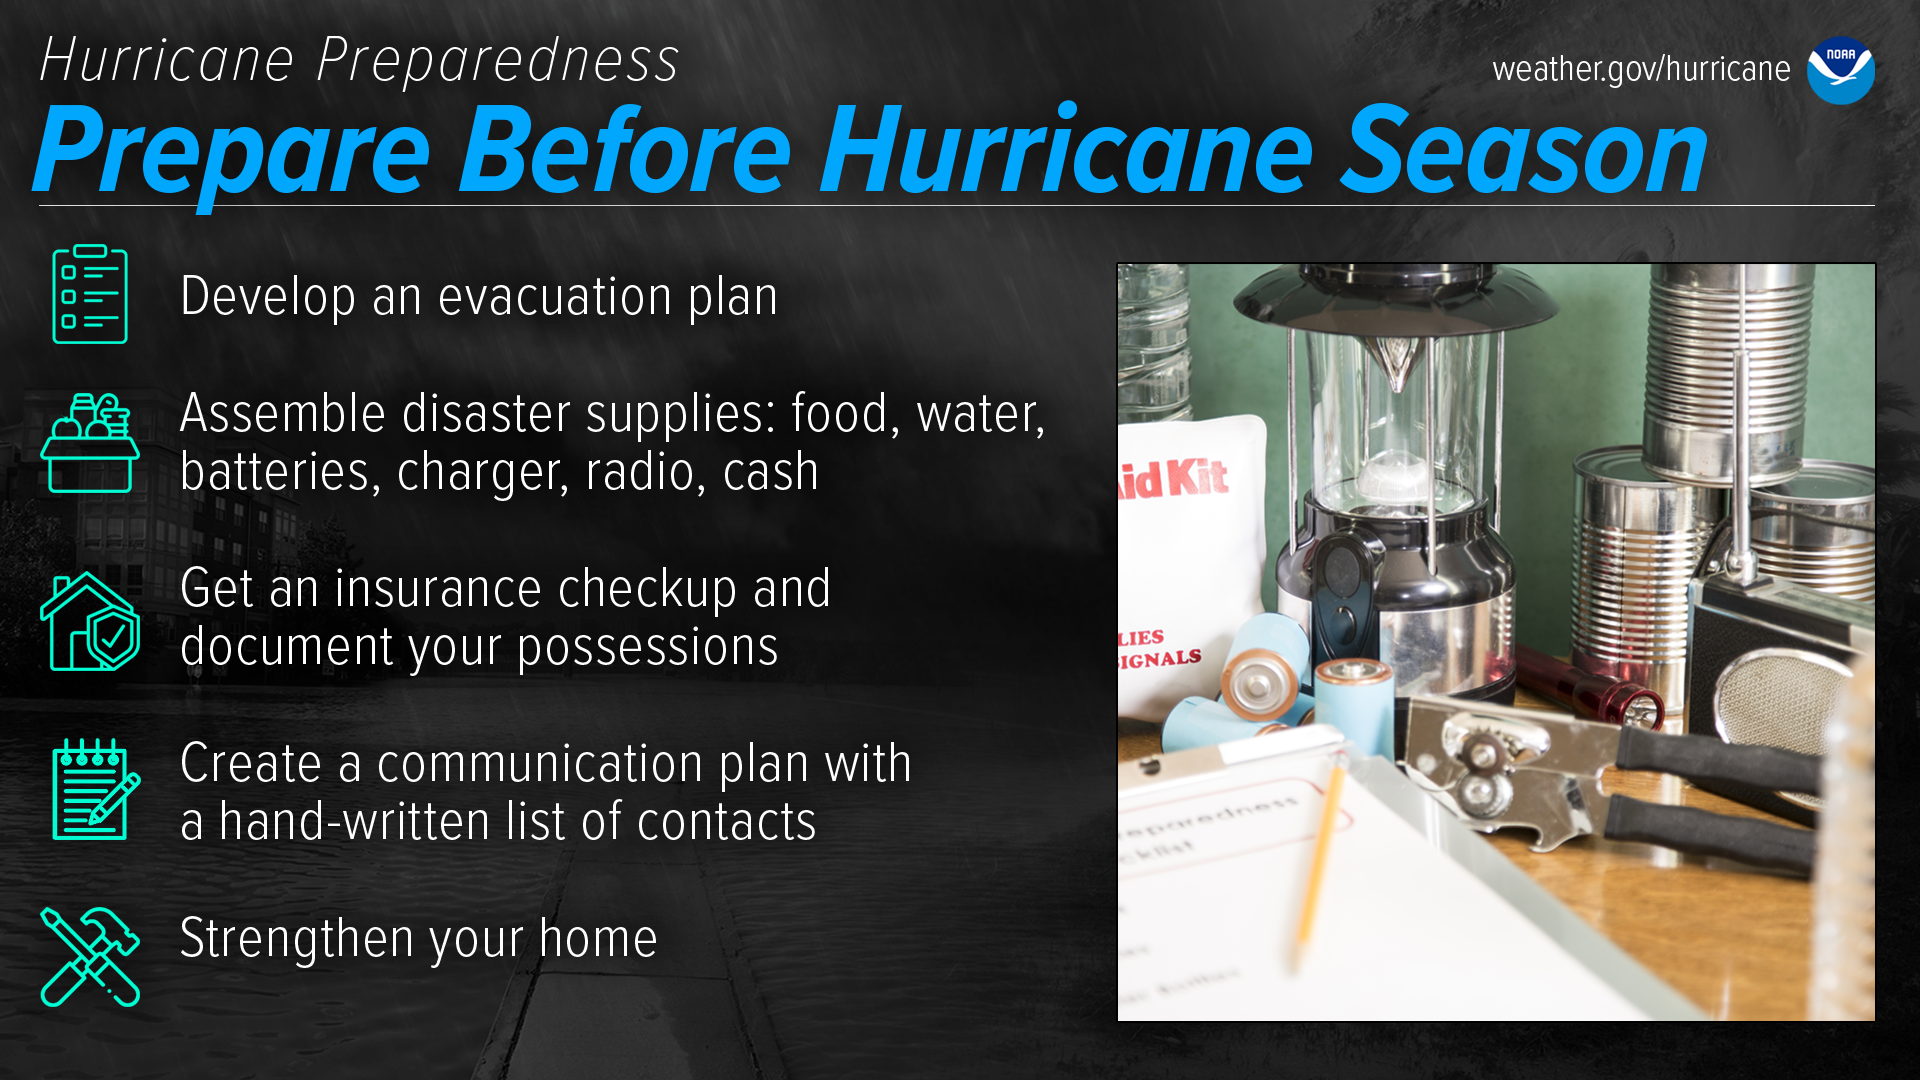 Hurricane Preparedness - Prepare Before Hurricane Season. Develop an evacuation plan. Assemble disaster supplies: food, water, batteries, charger, radio, cash. Get an insurance checkup and document your possessions. Create a communication plan with a hand-written list of contacts. Strengthen your home. ; Image credit: NOAA's National Weather Service